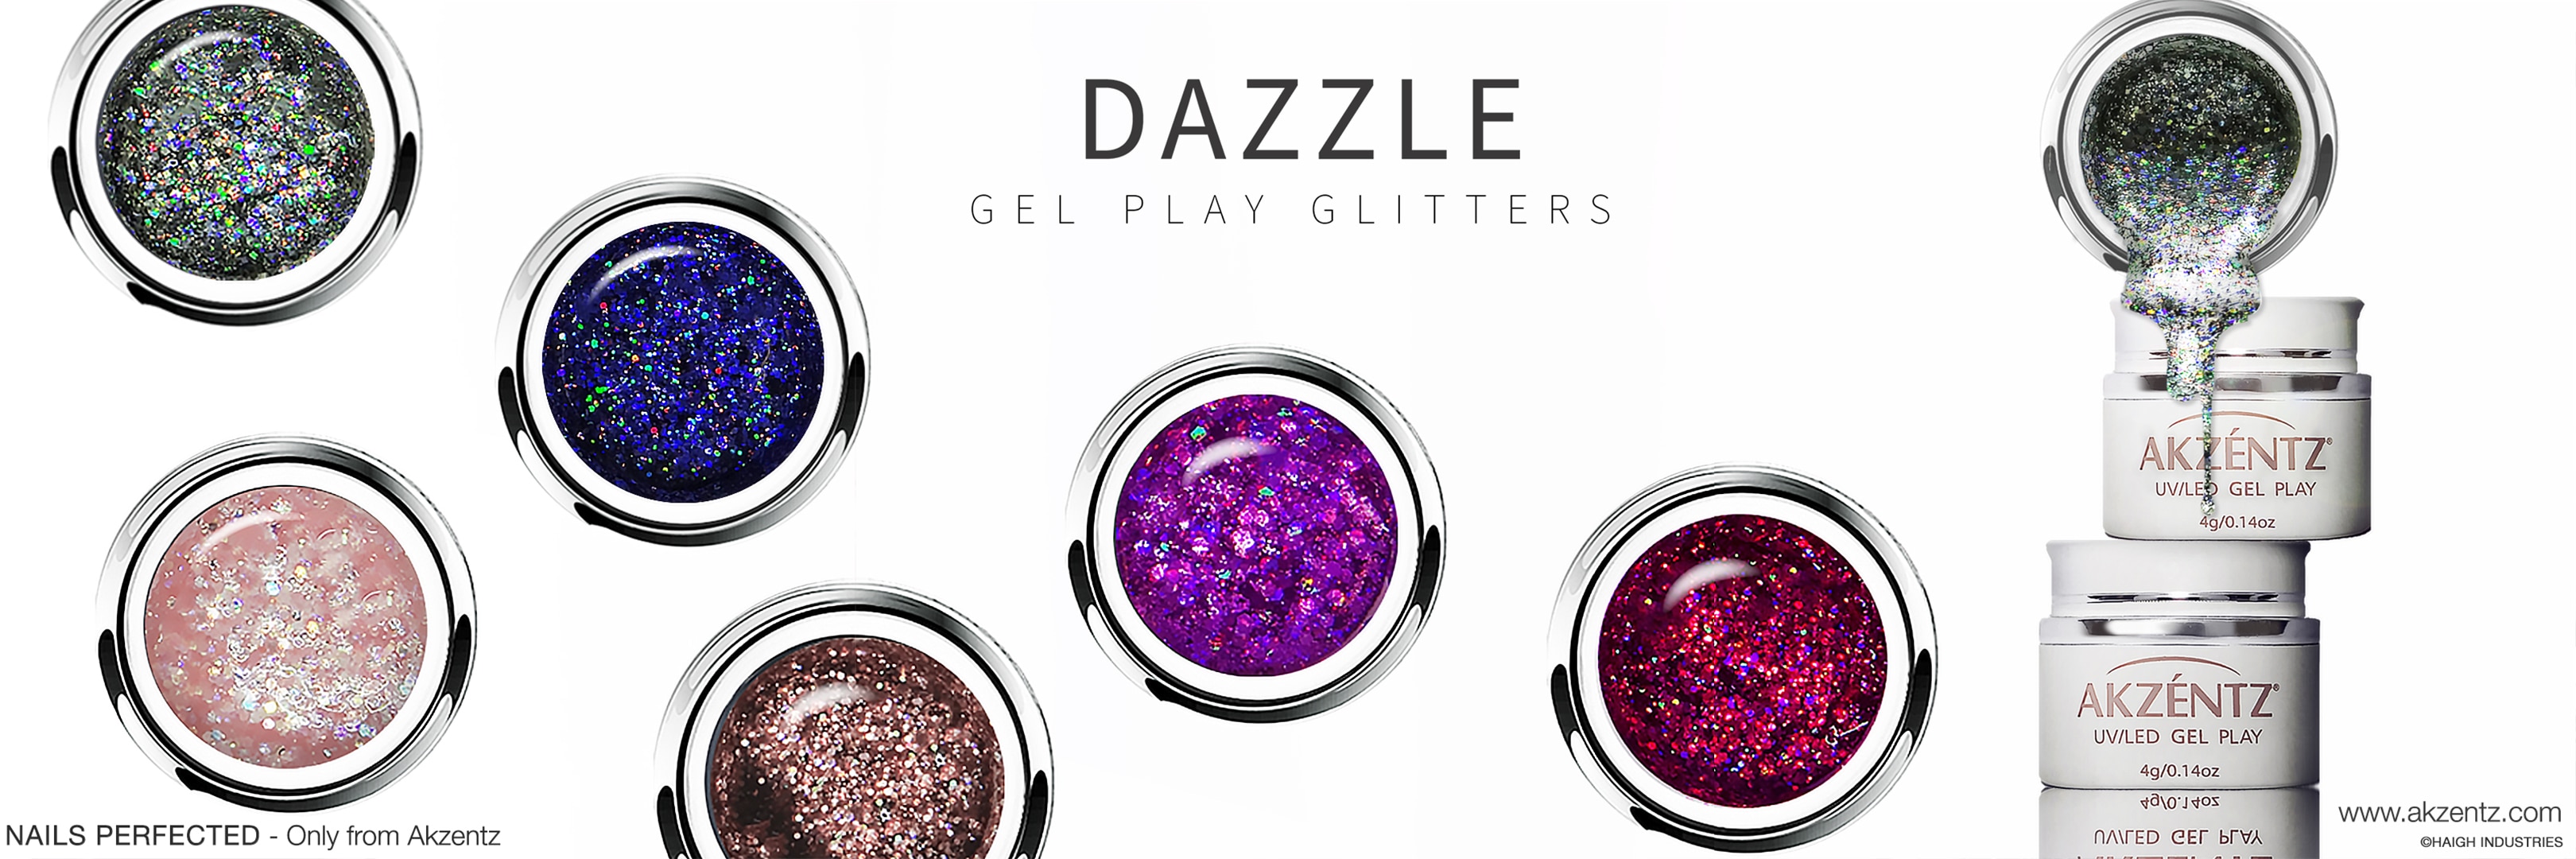 DAZZLE COLLECTION